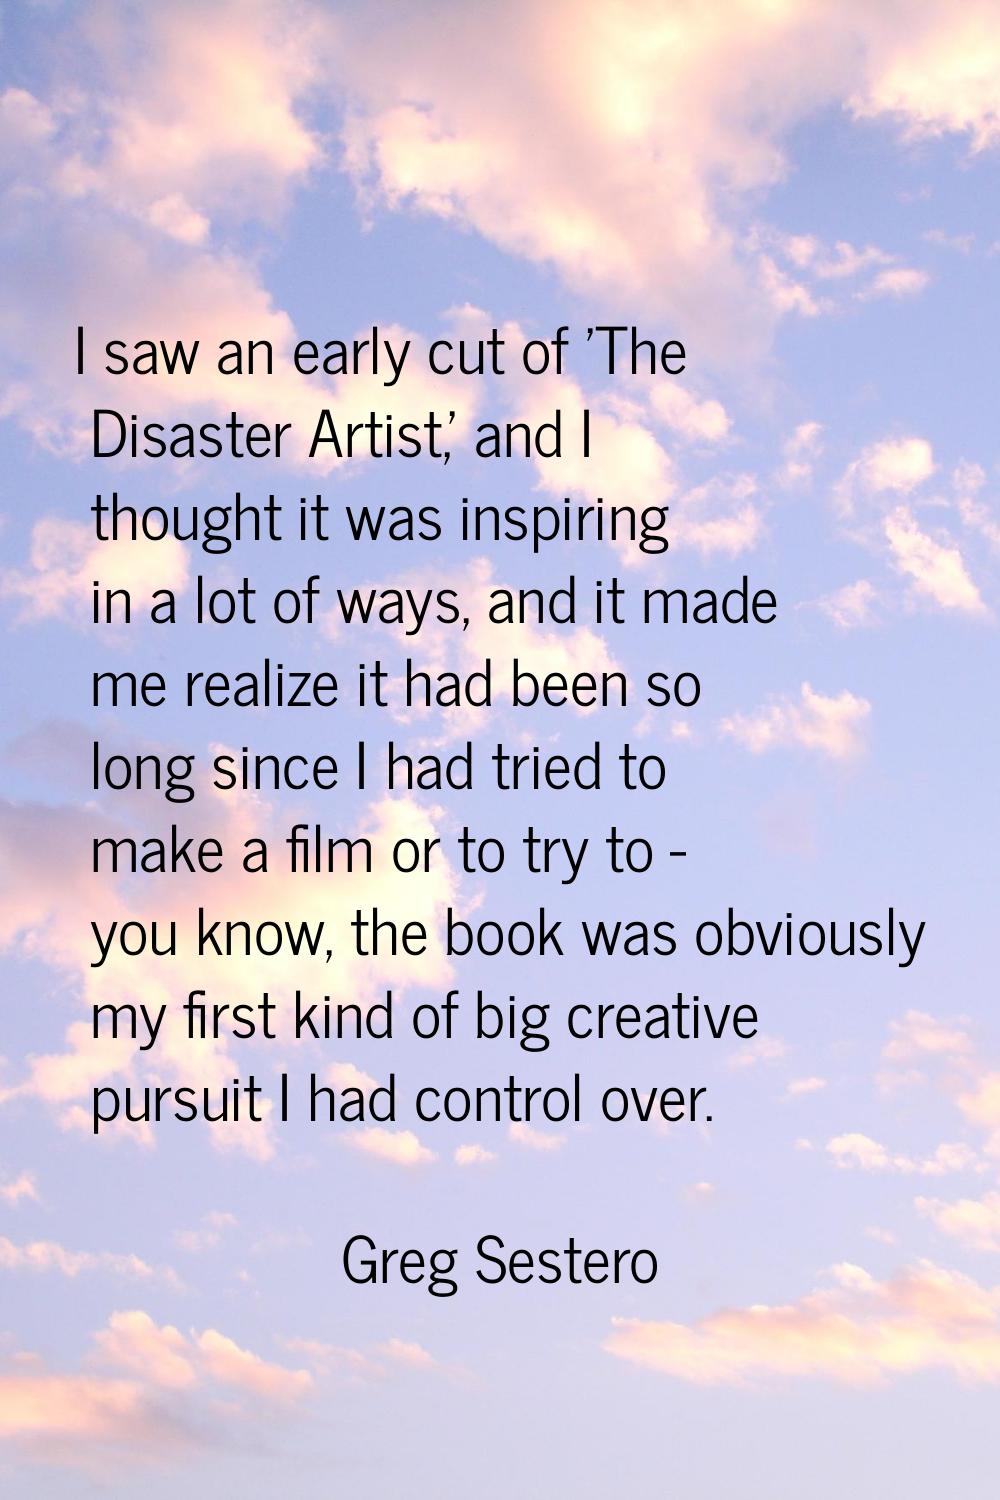 I saw an early cut of 'The Disaster Artist,' and I thought it was inspiring in a lot of ways, and i